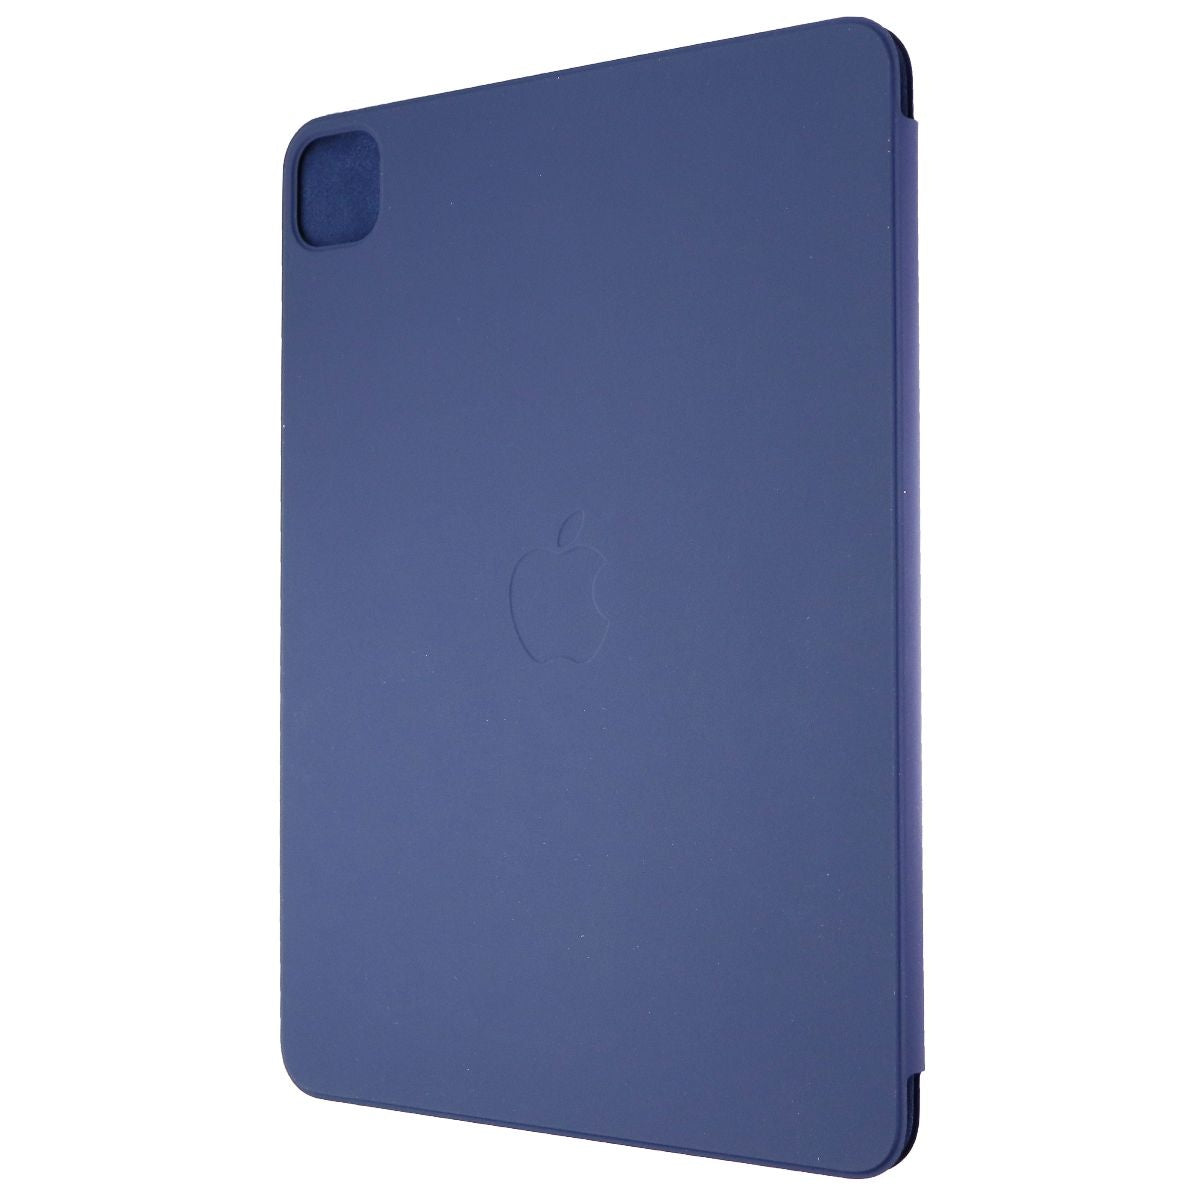 Apple Smart Folio (for iPad Pro 11-inch - 3rd Gen) - Deep Navy (MJMC3ZM/A) iPad/Tablet Accessories - Cases, Covers, Keyboard Folios Apple    - Simple Cell Bulk Wholesale Pricing - USA Seller